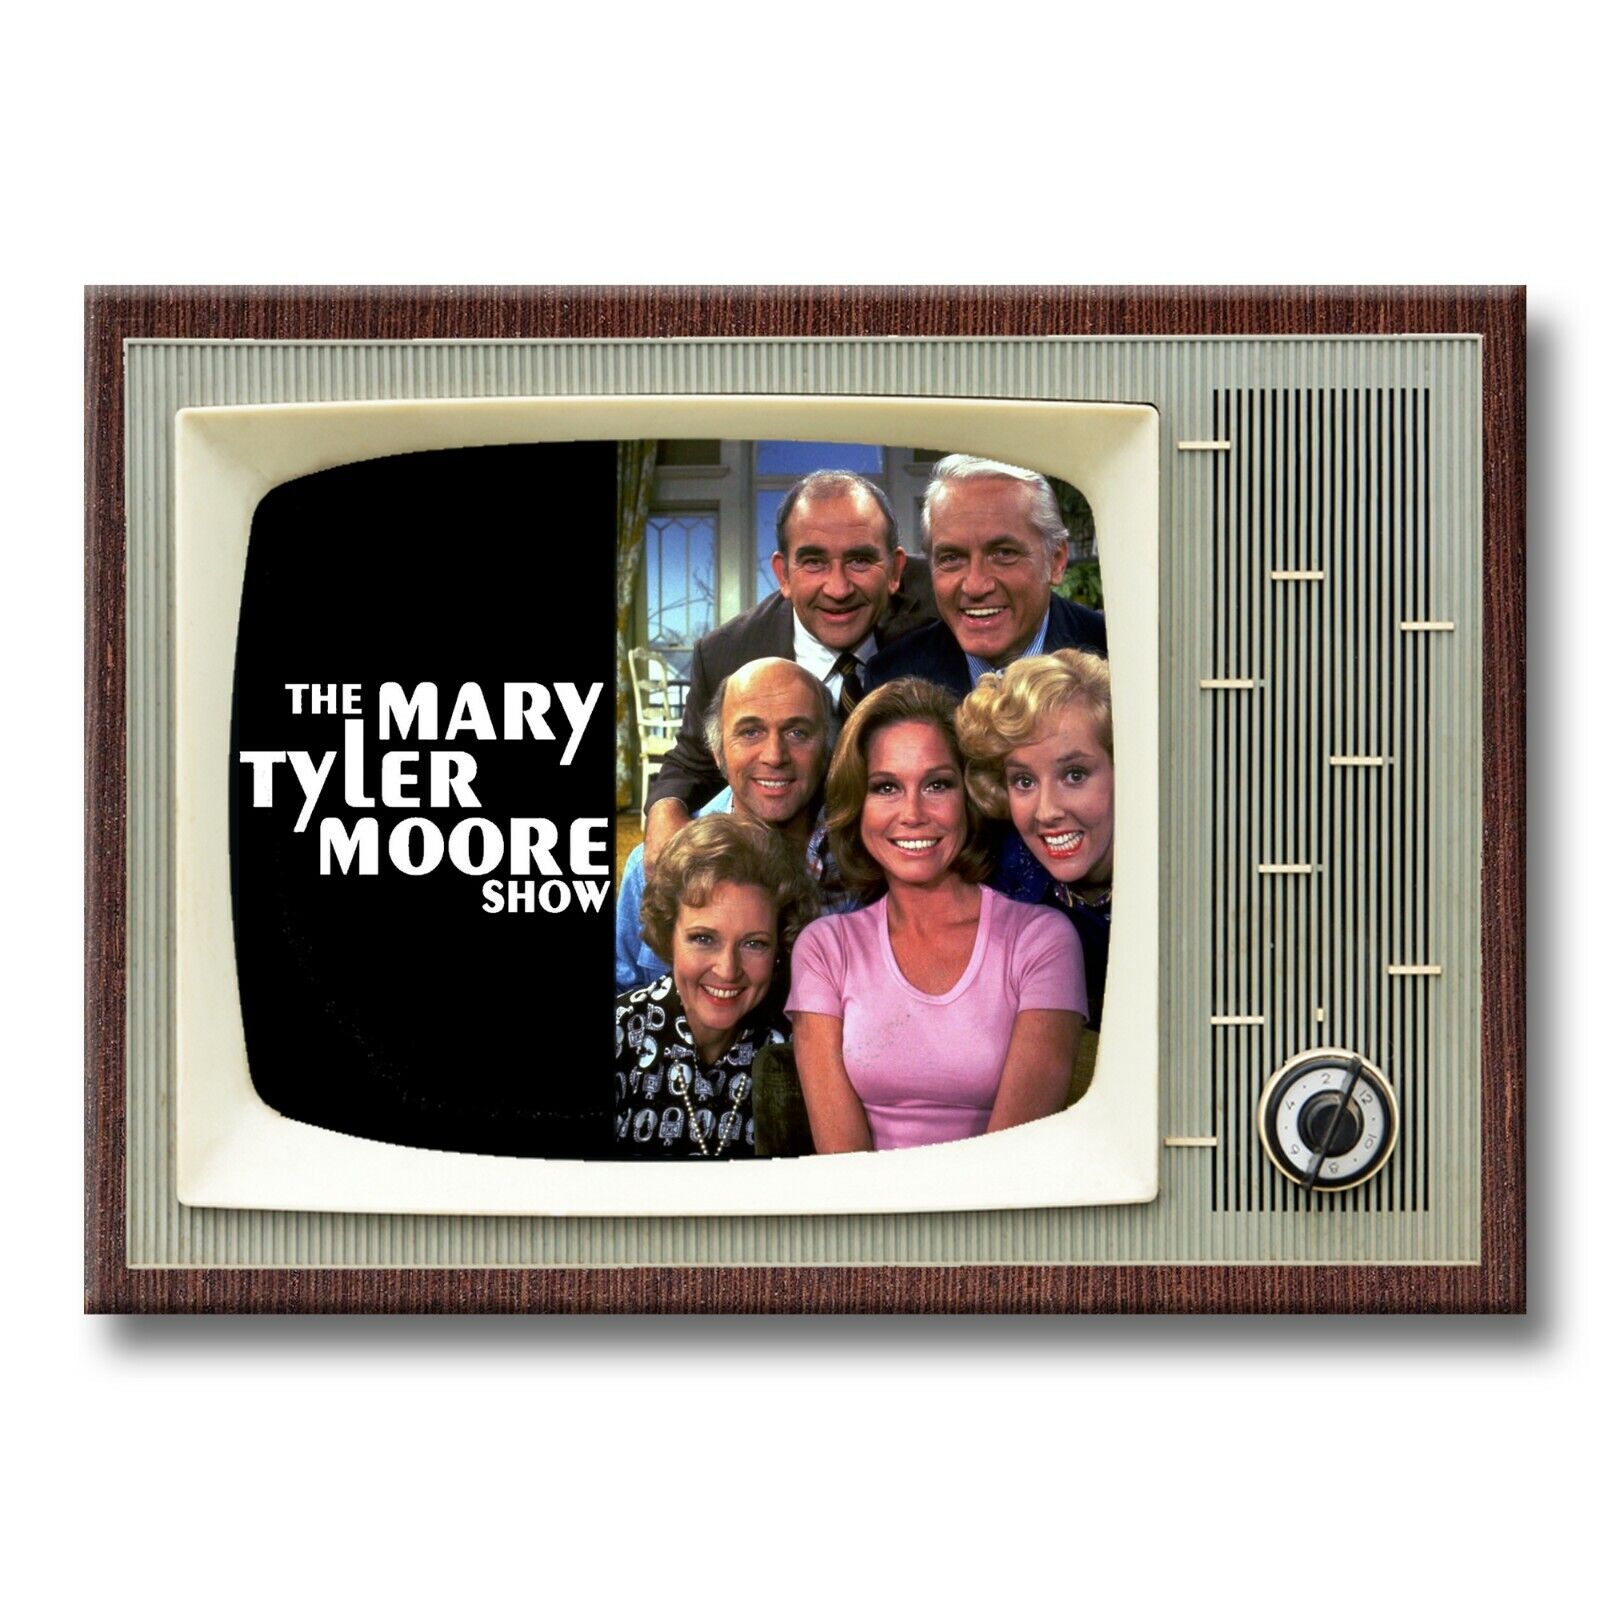 The MARY TYLER MOORE SHOW Classic TV 3.5 inches x 2.5 inches Steel FRIDGE MAGNET